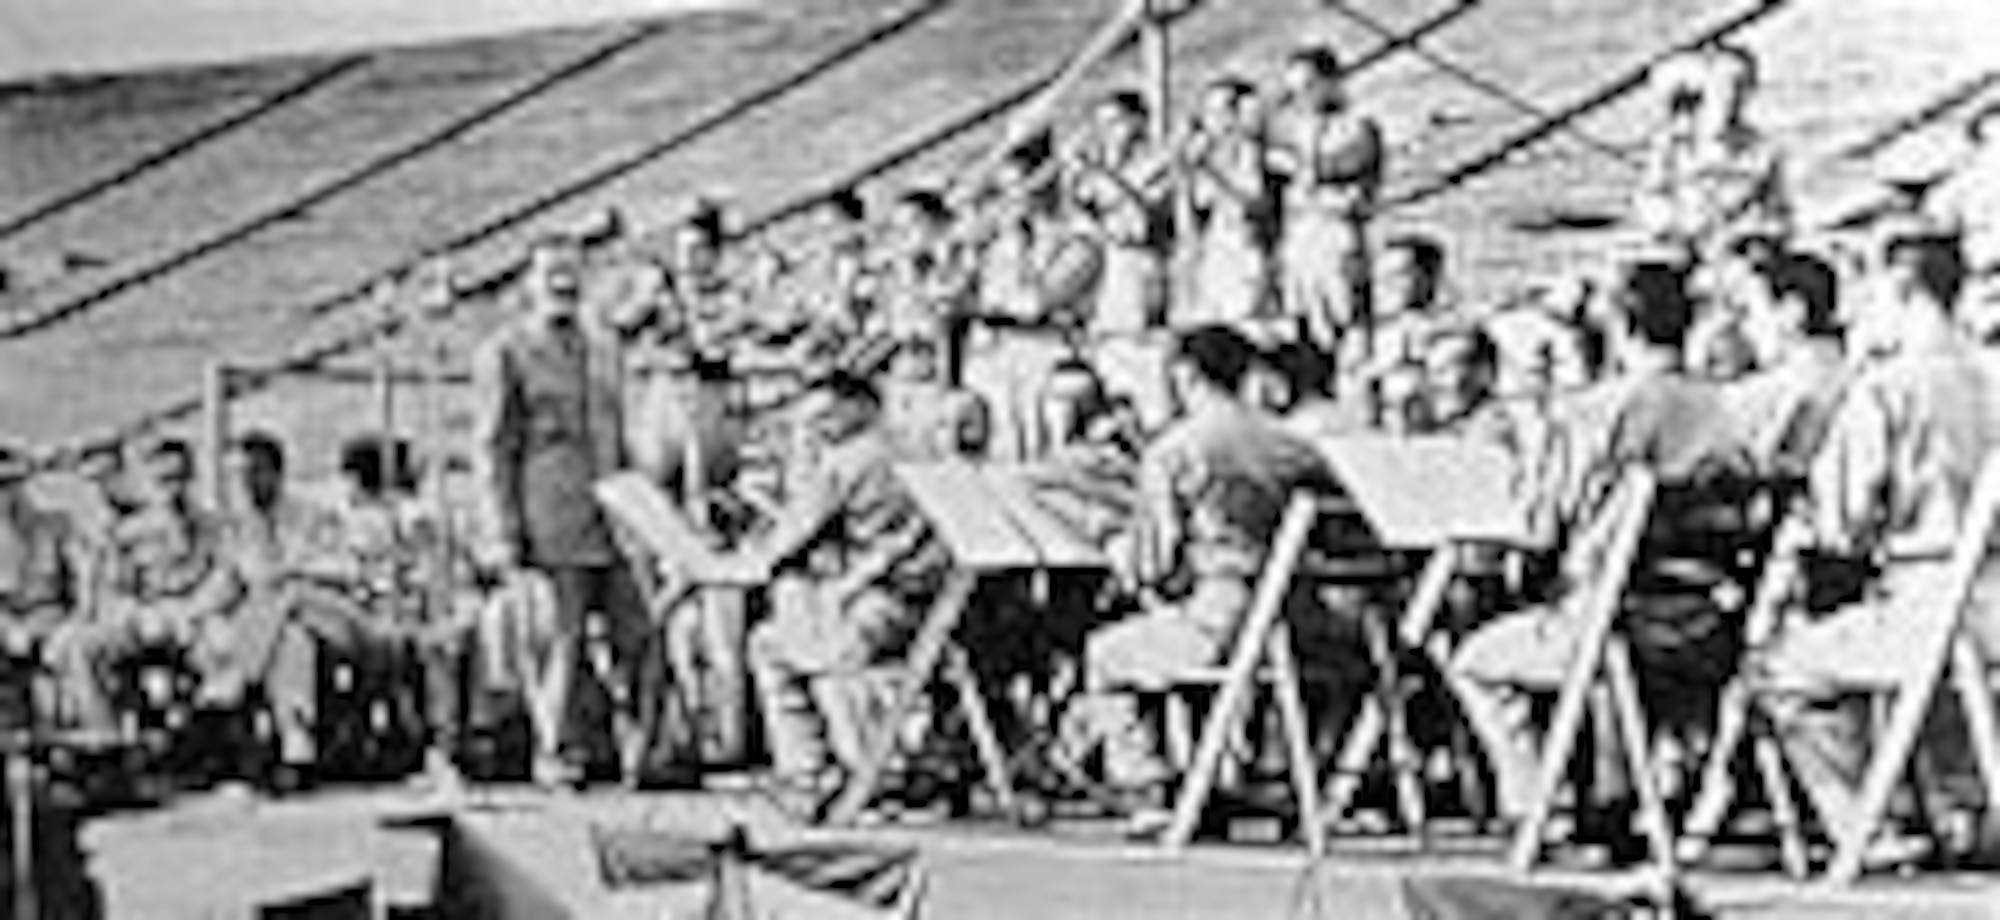 The Glenn Miller Army Air Force Band performs at the Yale Bowl at Yale University in 1943. (U.S. Air Force photo)